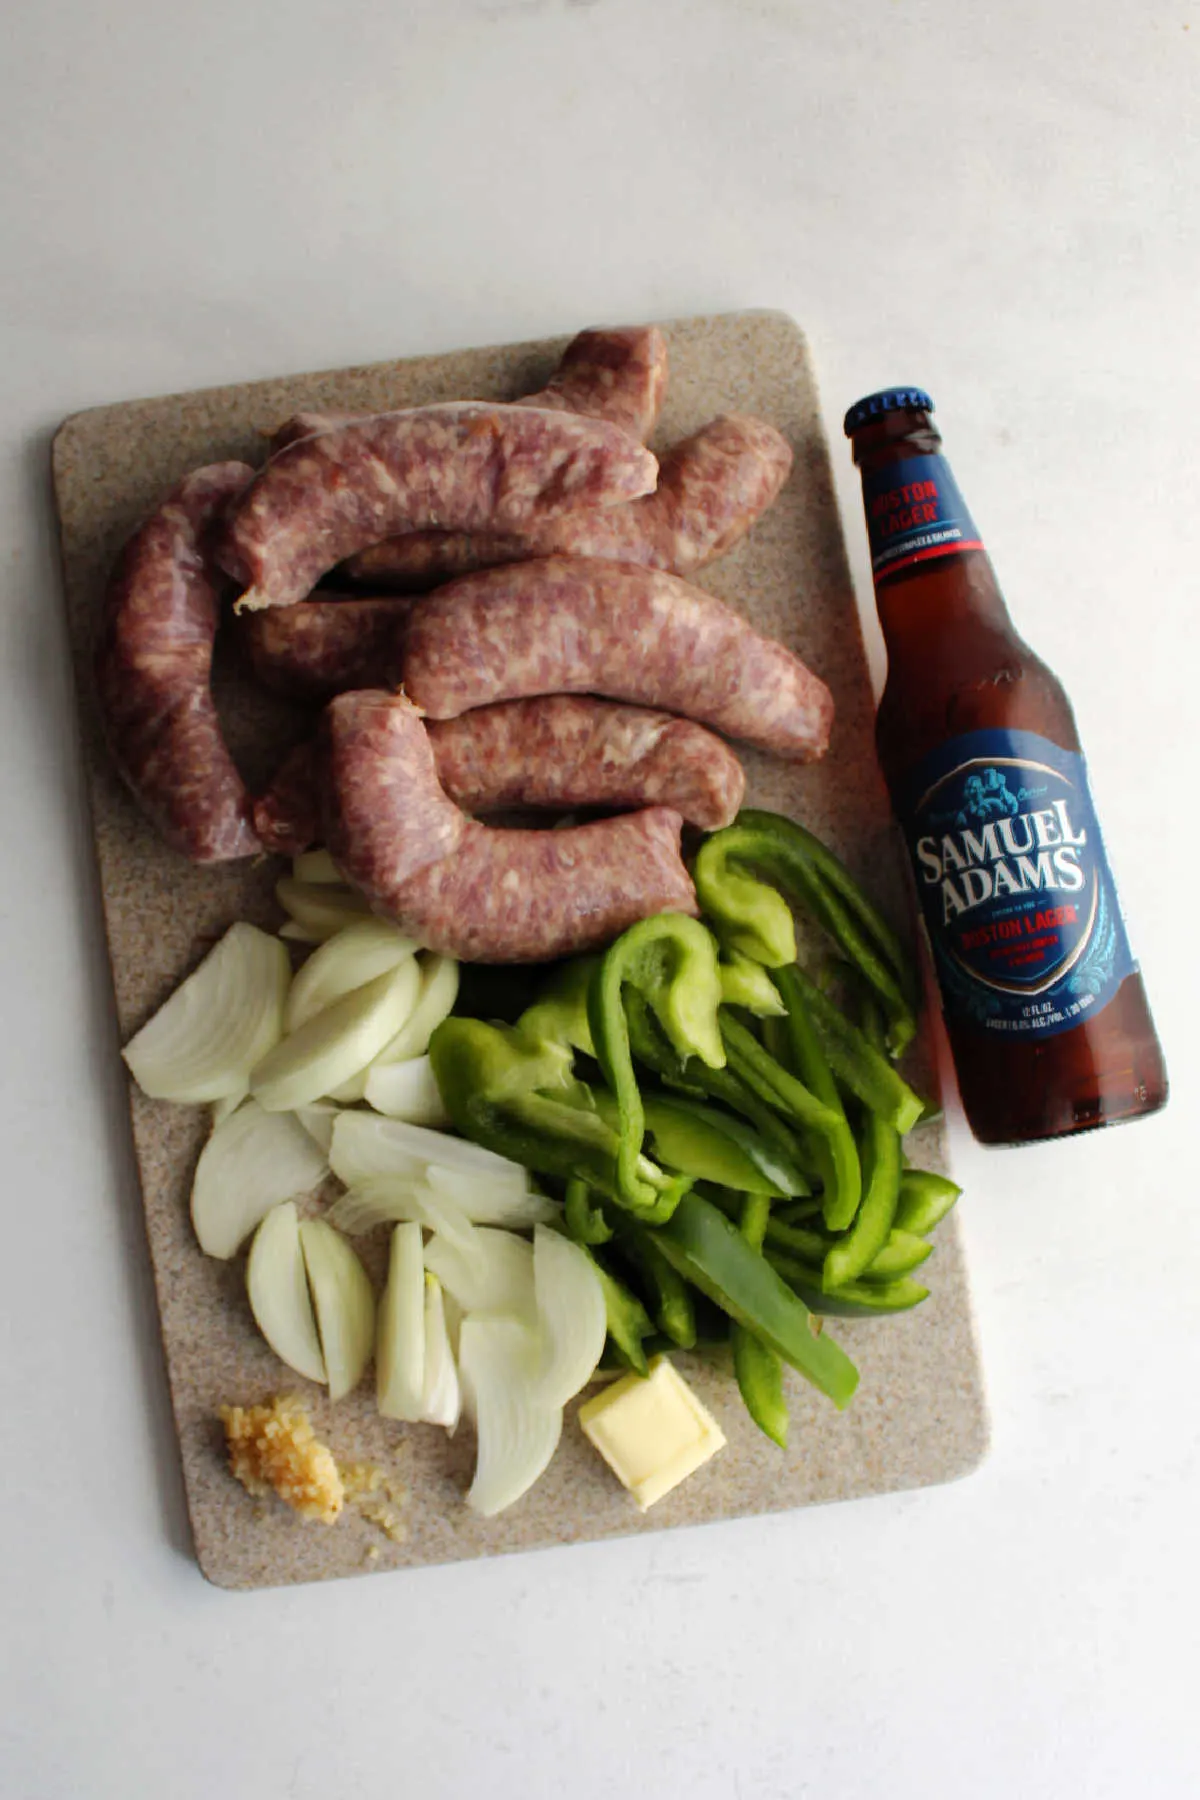 Cutting board filled with sliced onions and peppers, diced garlic, butter and brats next to a bottle of beer.